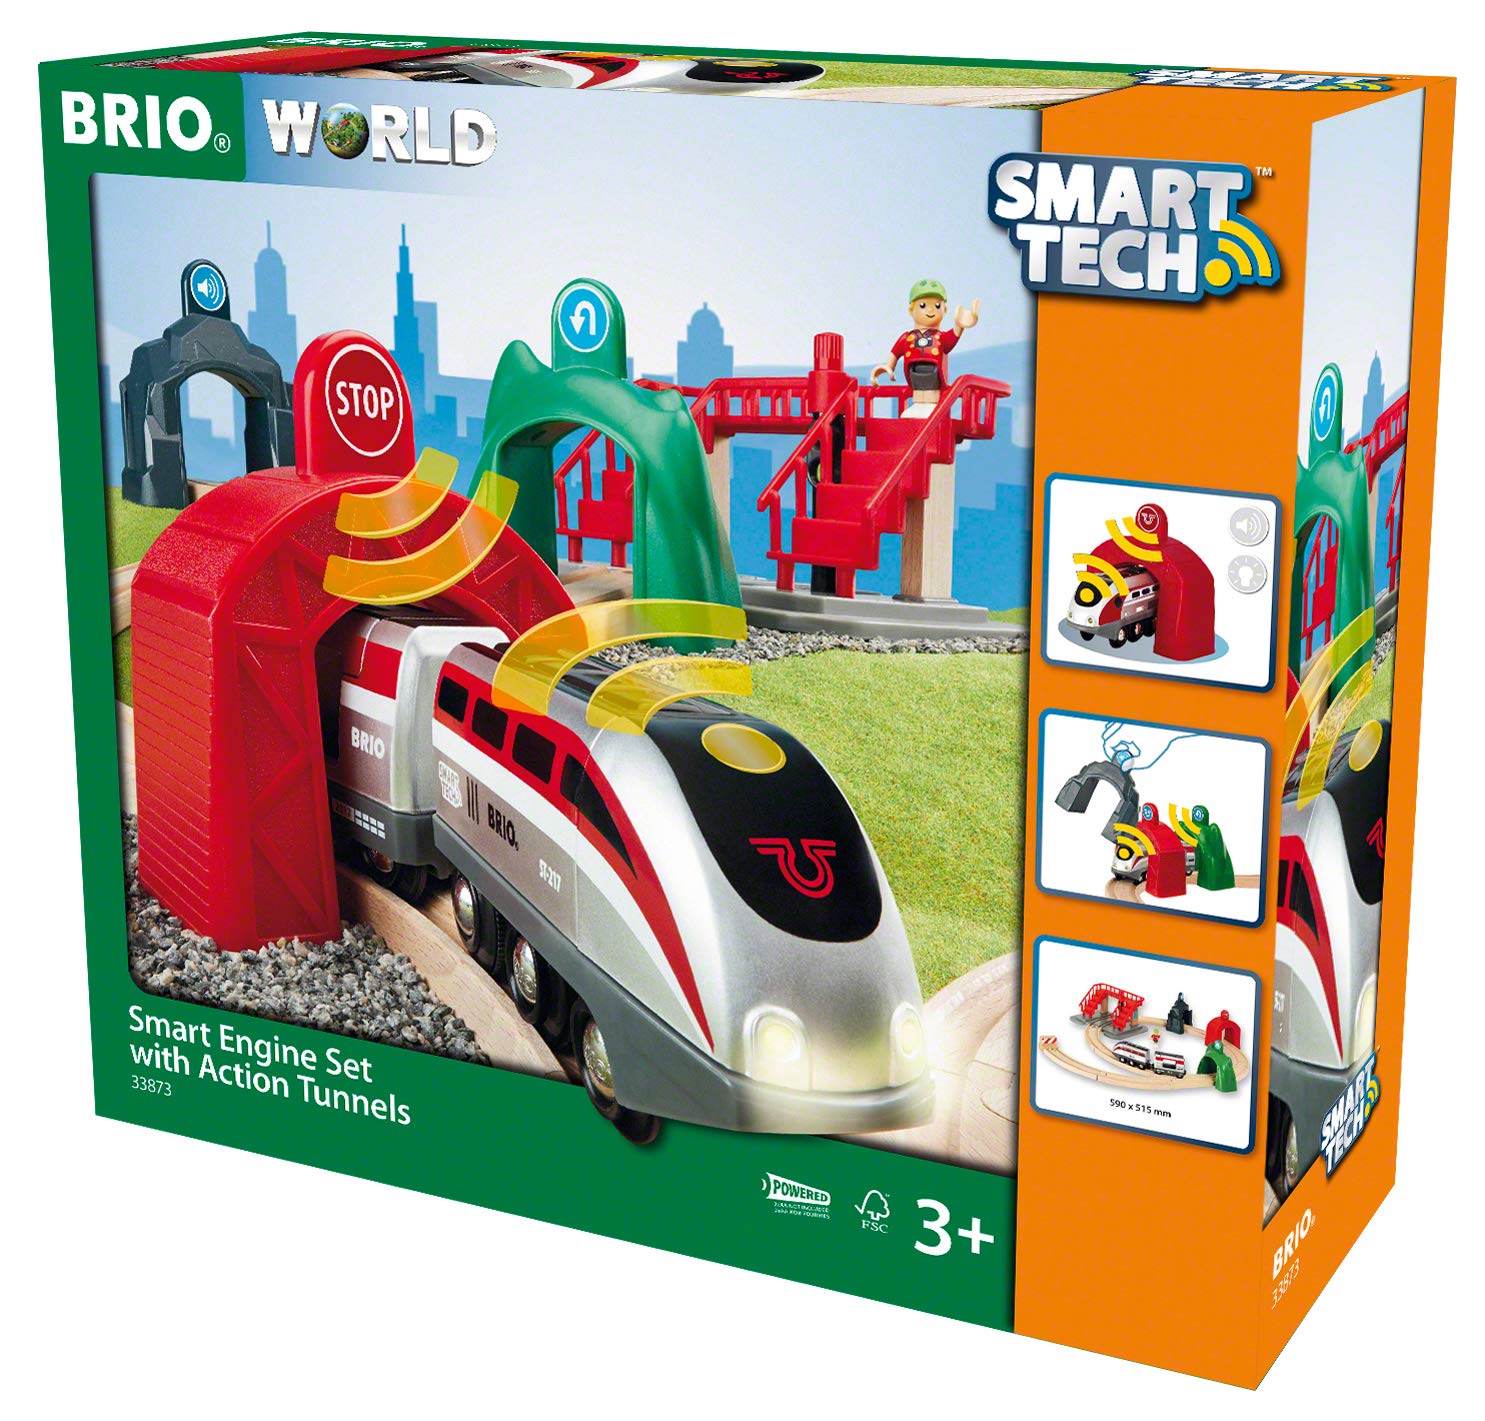 Brio Smart Tech Engine Set with Action Tunnels